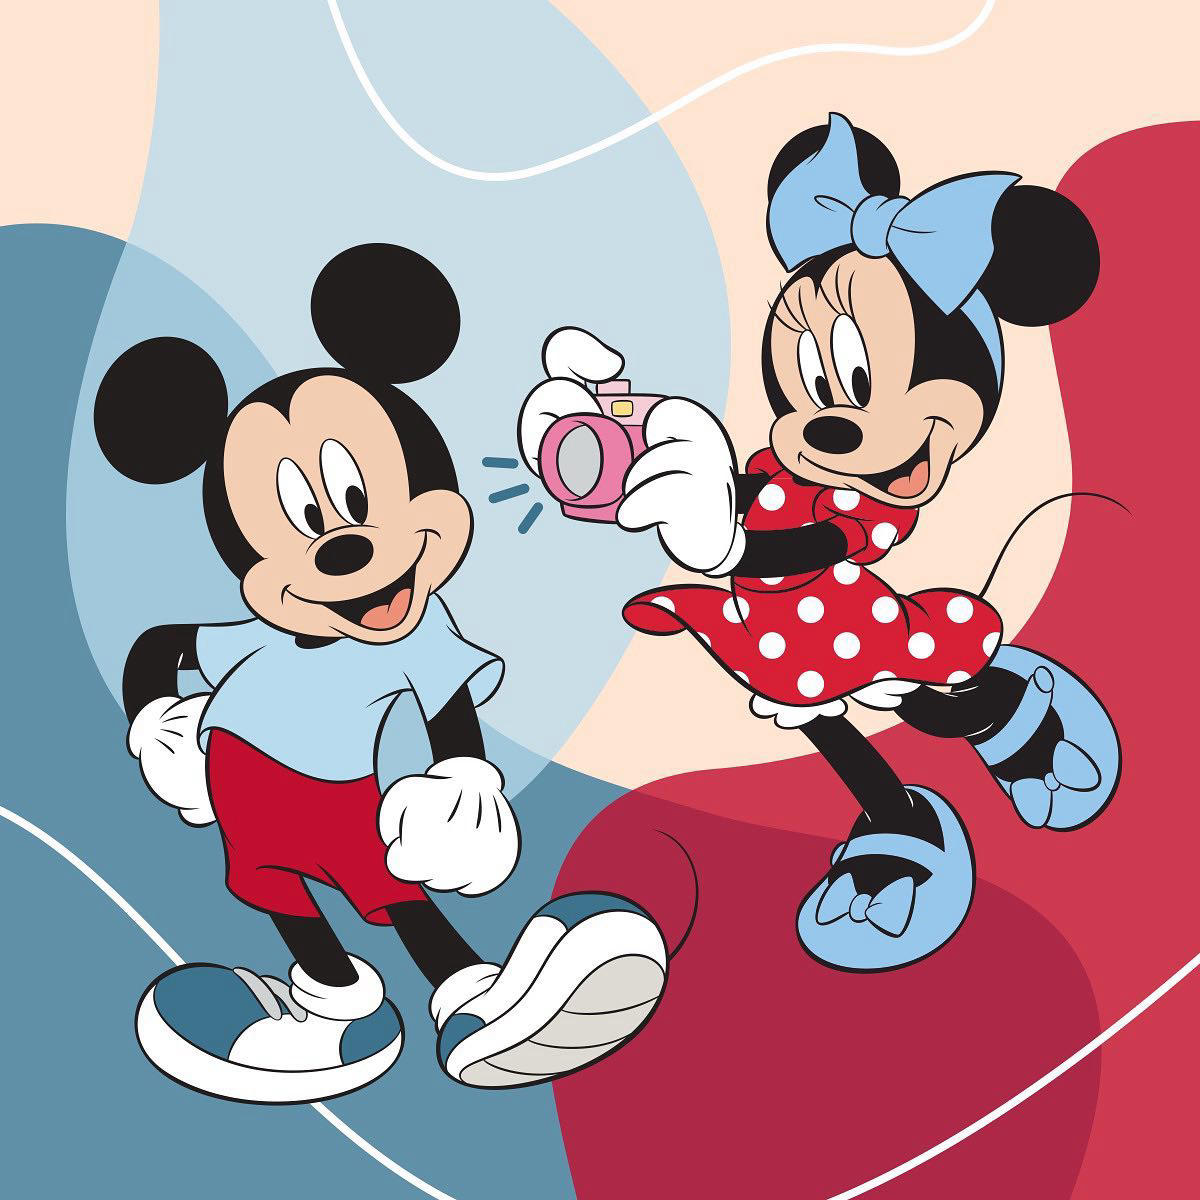 image  1 Mickey Mouse - Because life together is always picture perfect